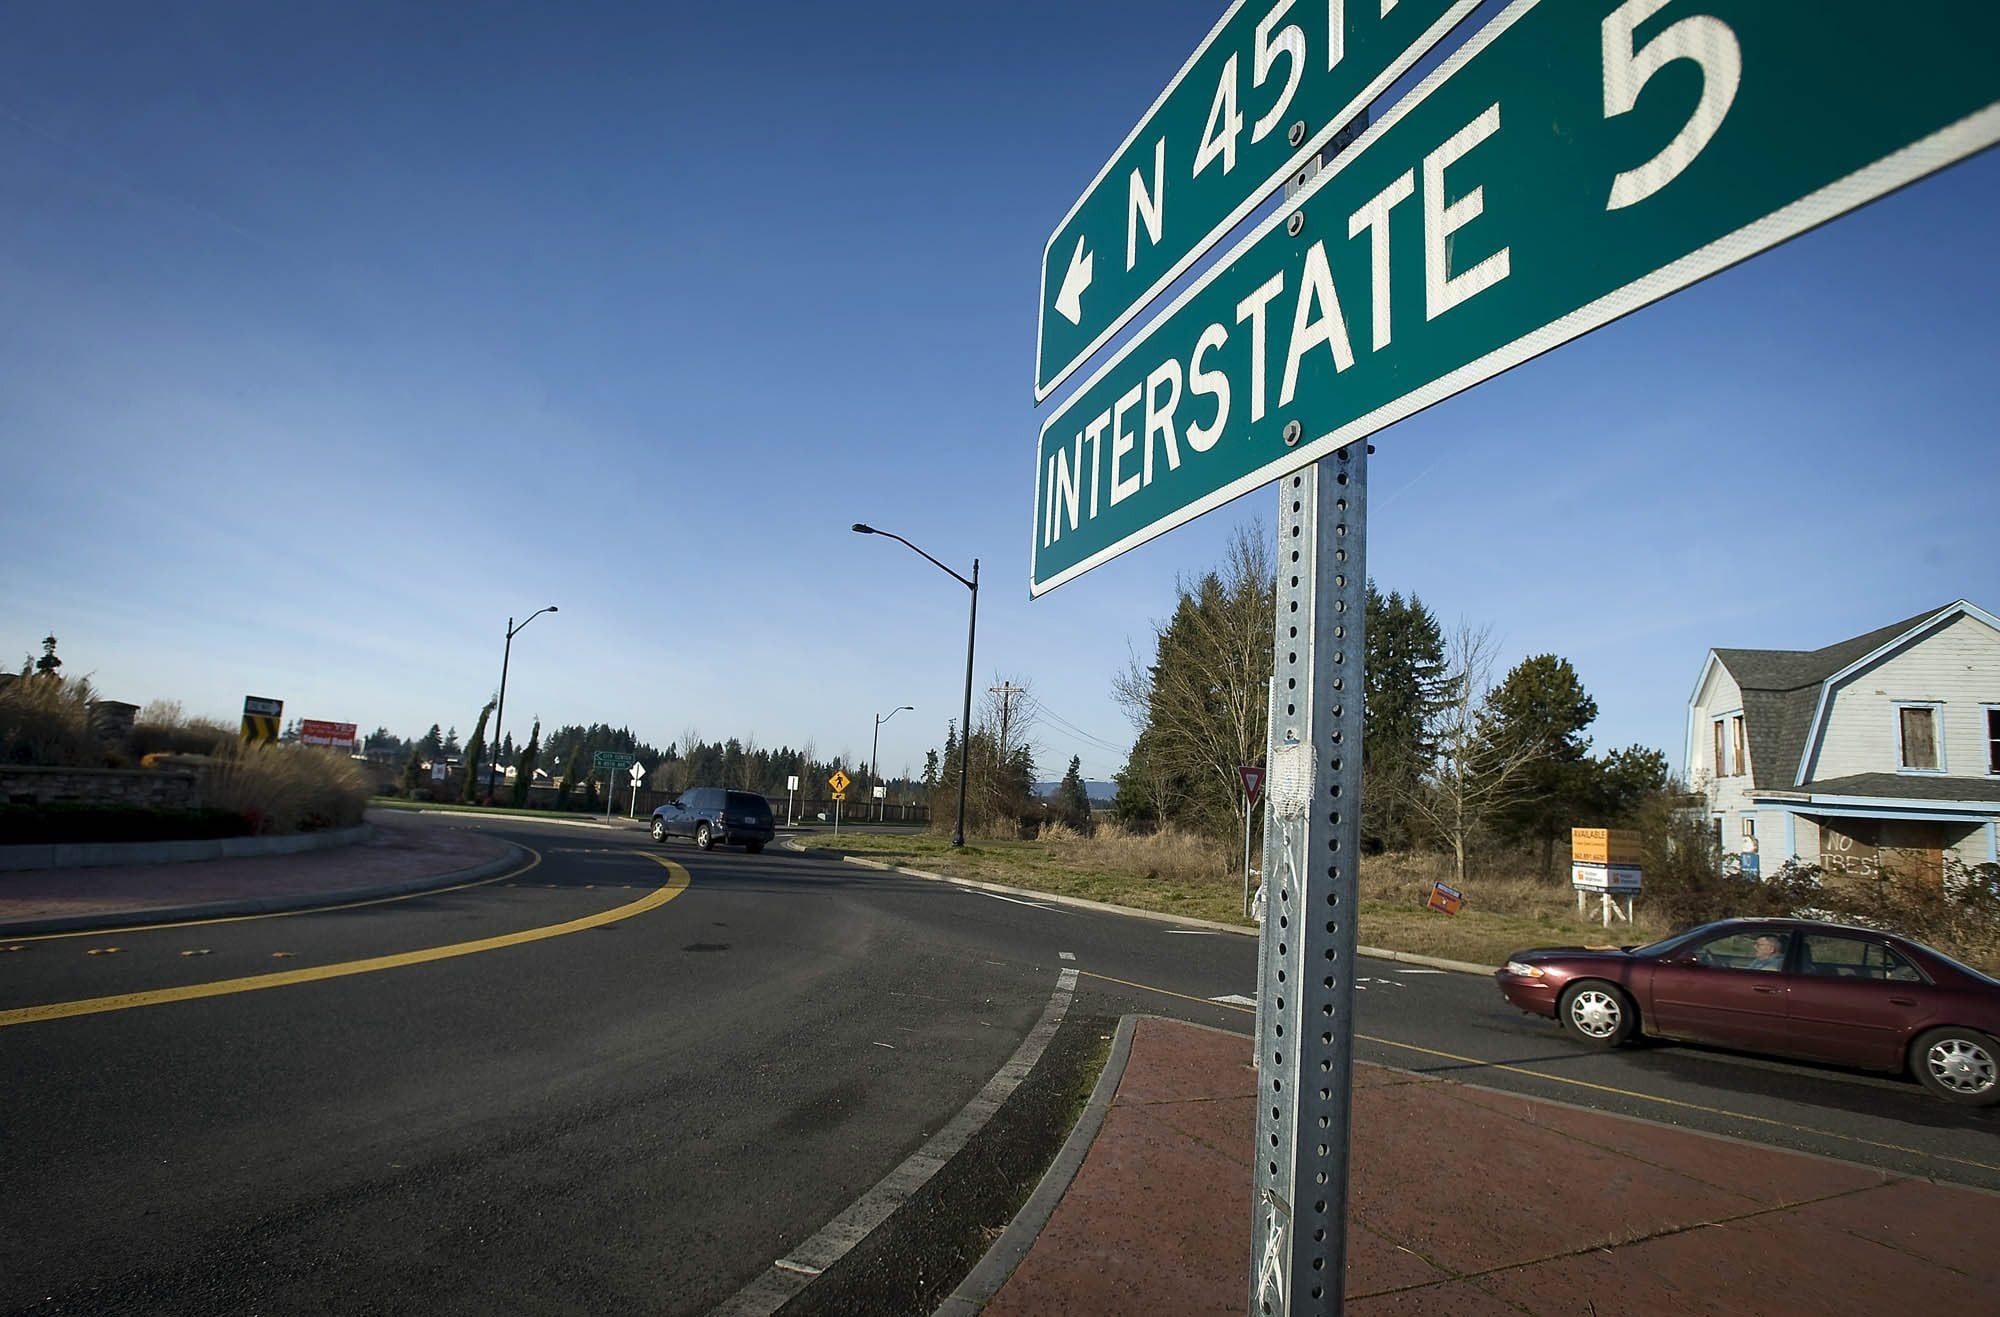 Ridgefield has plenty of room for growth on largely vacant land near Interstate 5, where a blighted former farm house remains standing at the traffic circle on Pioneer Street at North 45th Street.